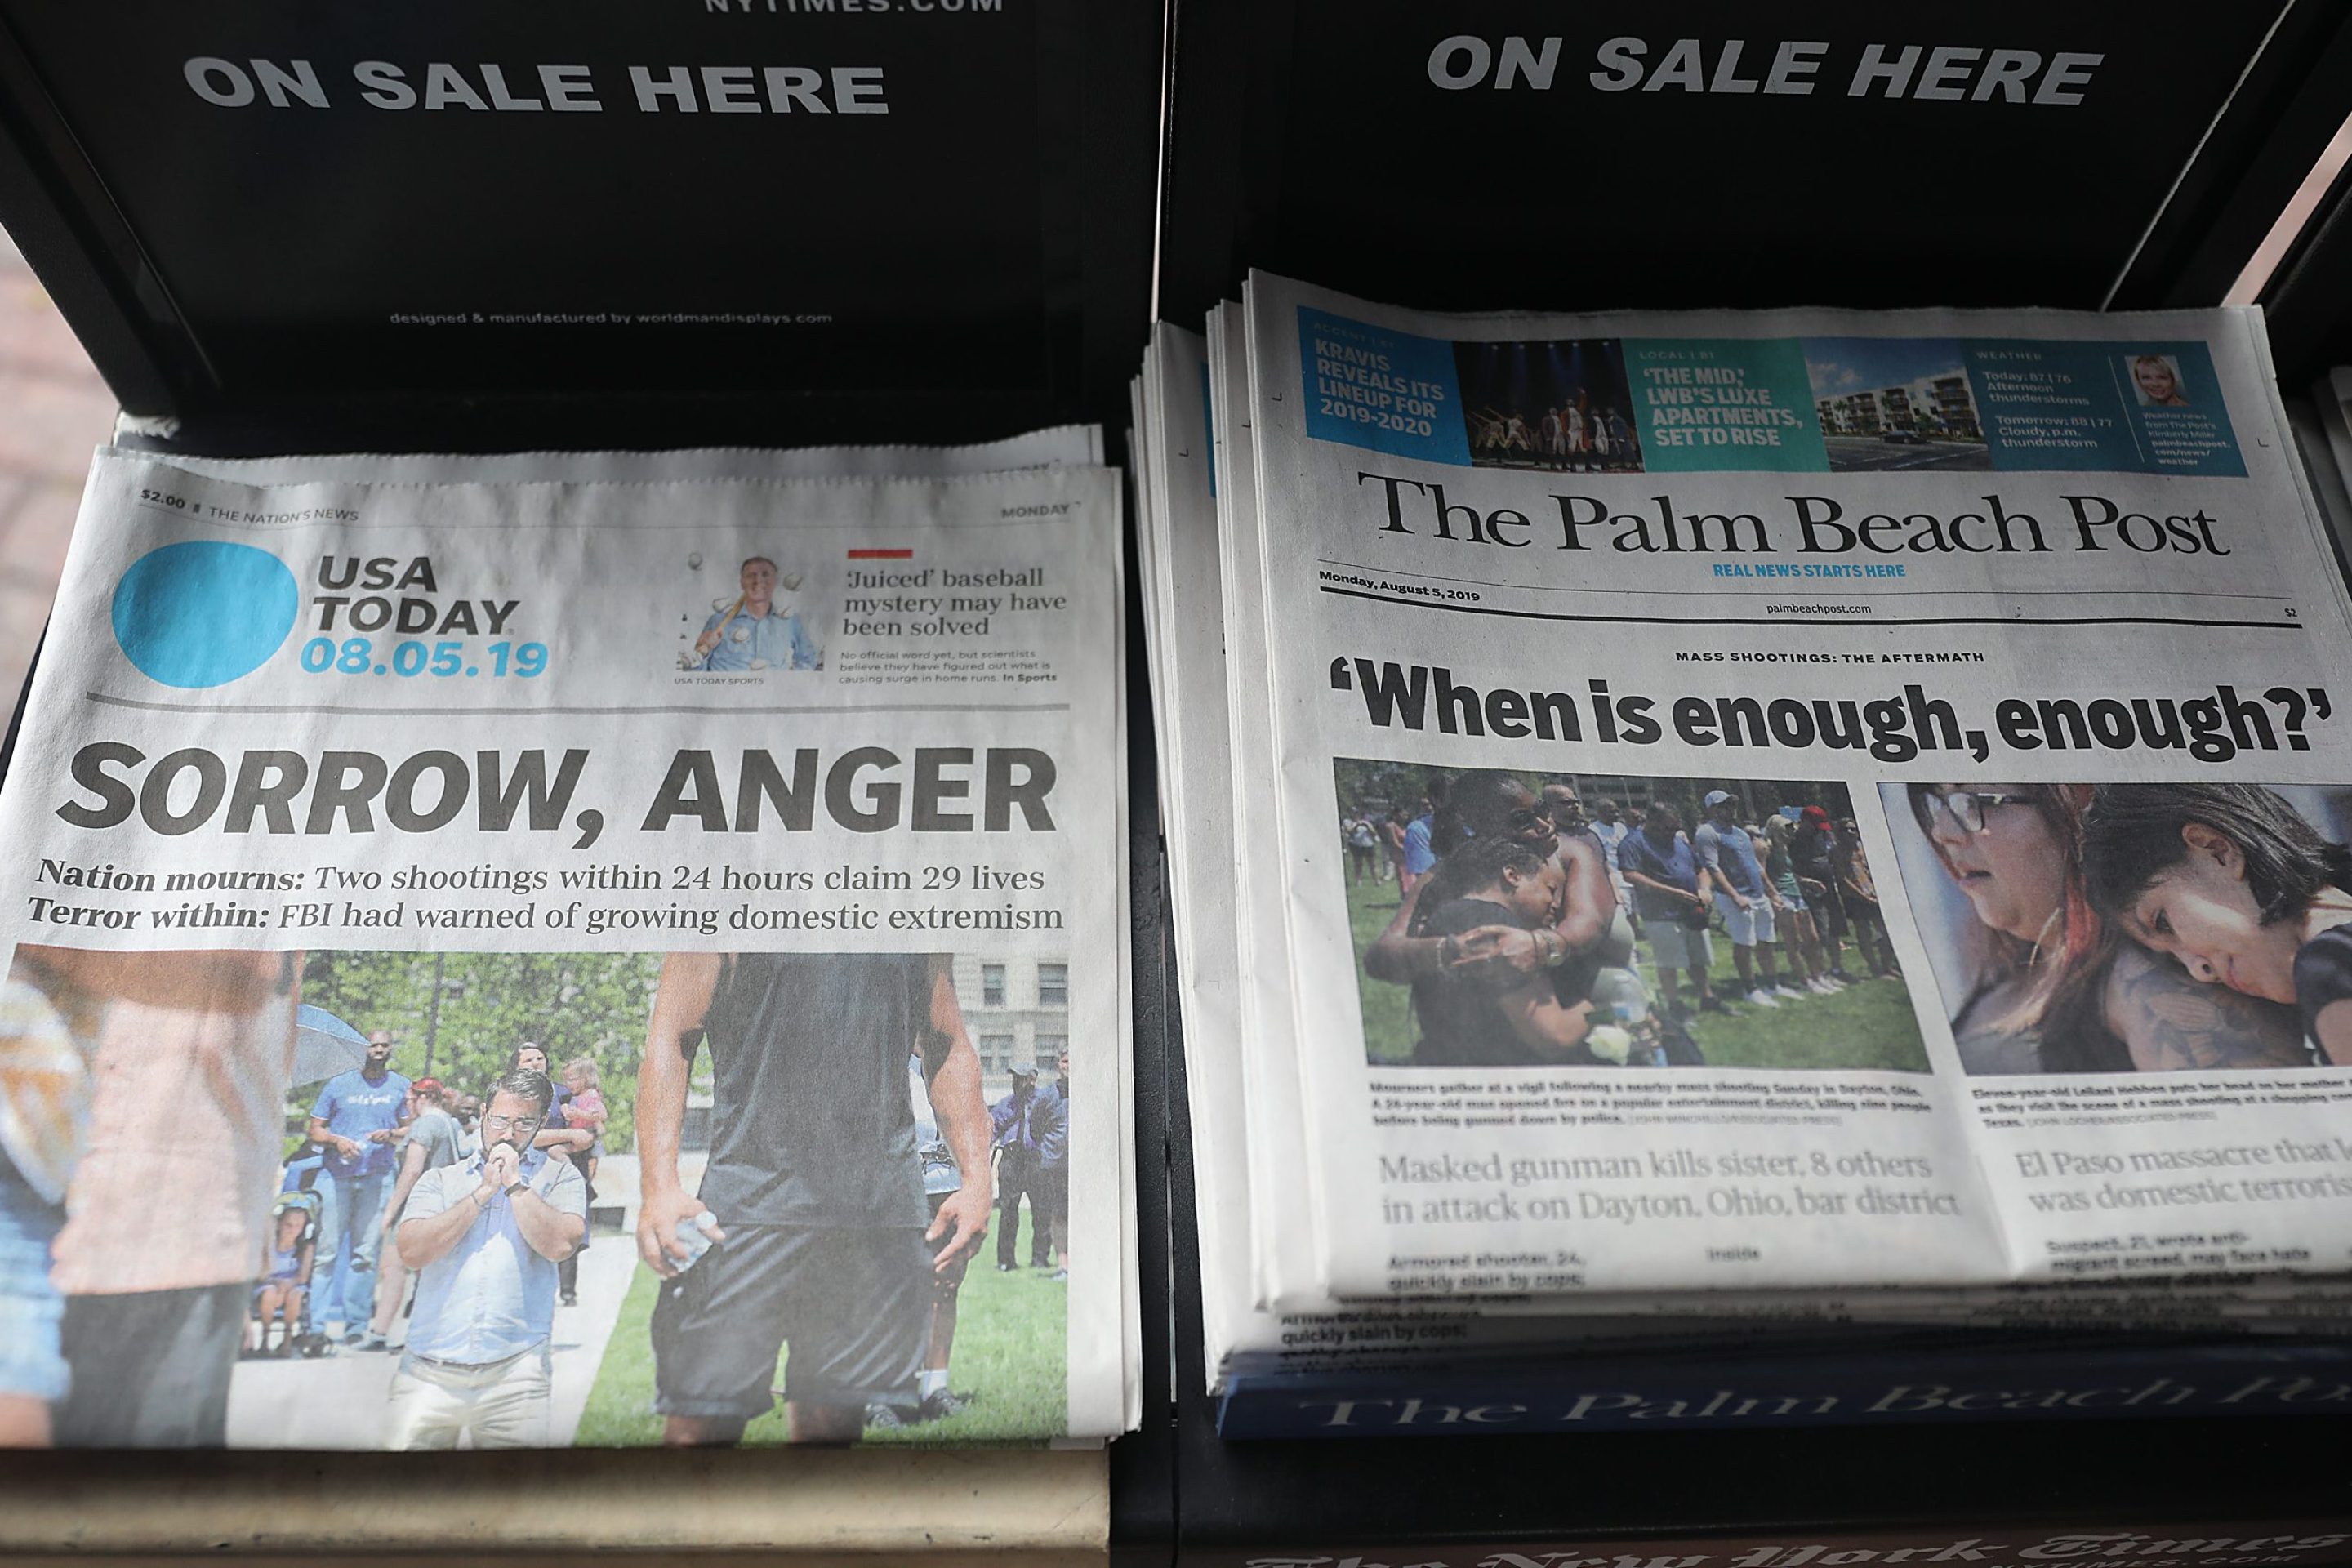 A GateHouse Media owned Palm Beach Post and the Gannett Co. owned USA Today are seen for sale at a newsstand on August 05, 2019 in Palm Beach, Florida. The Post now is also owned by Gannett